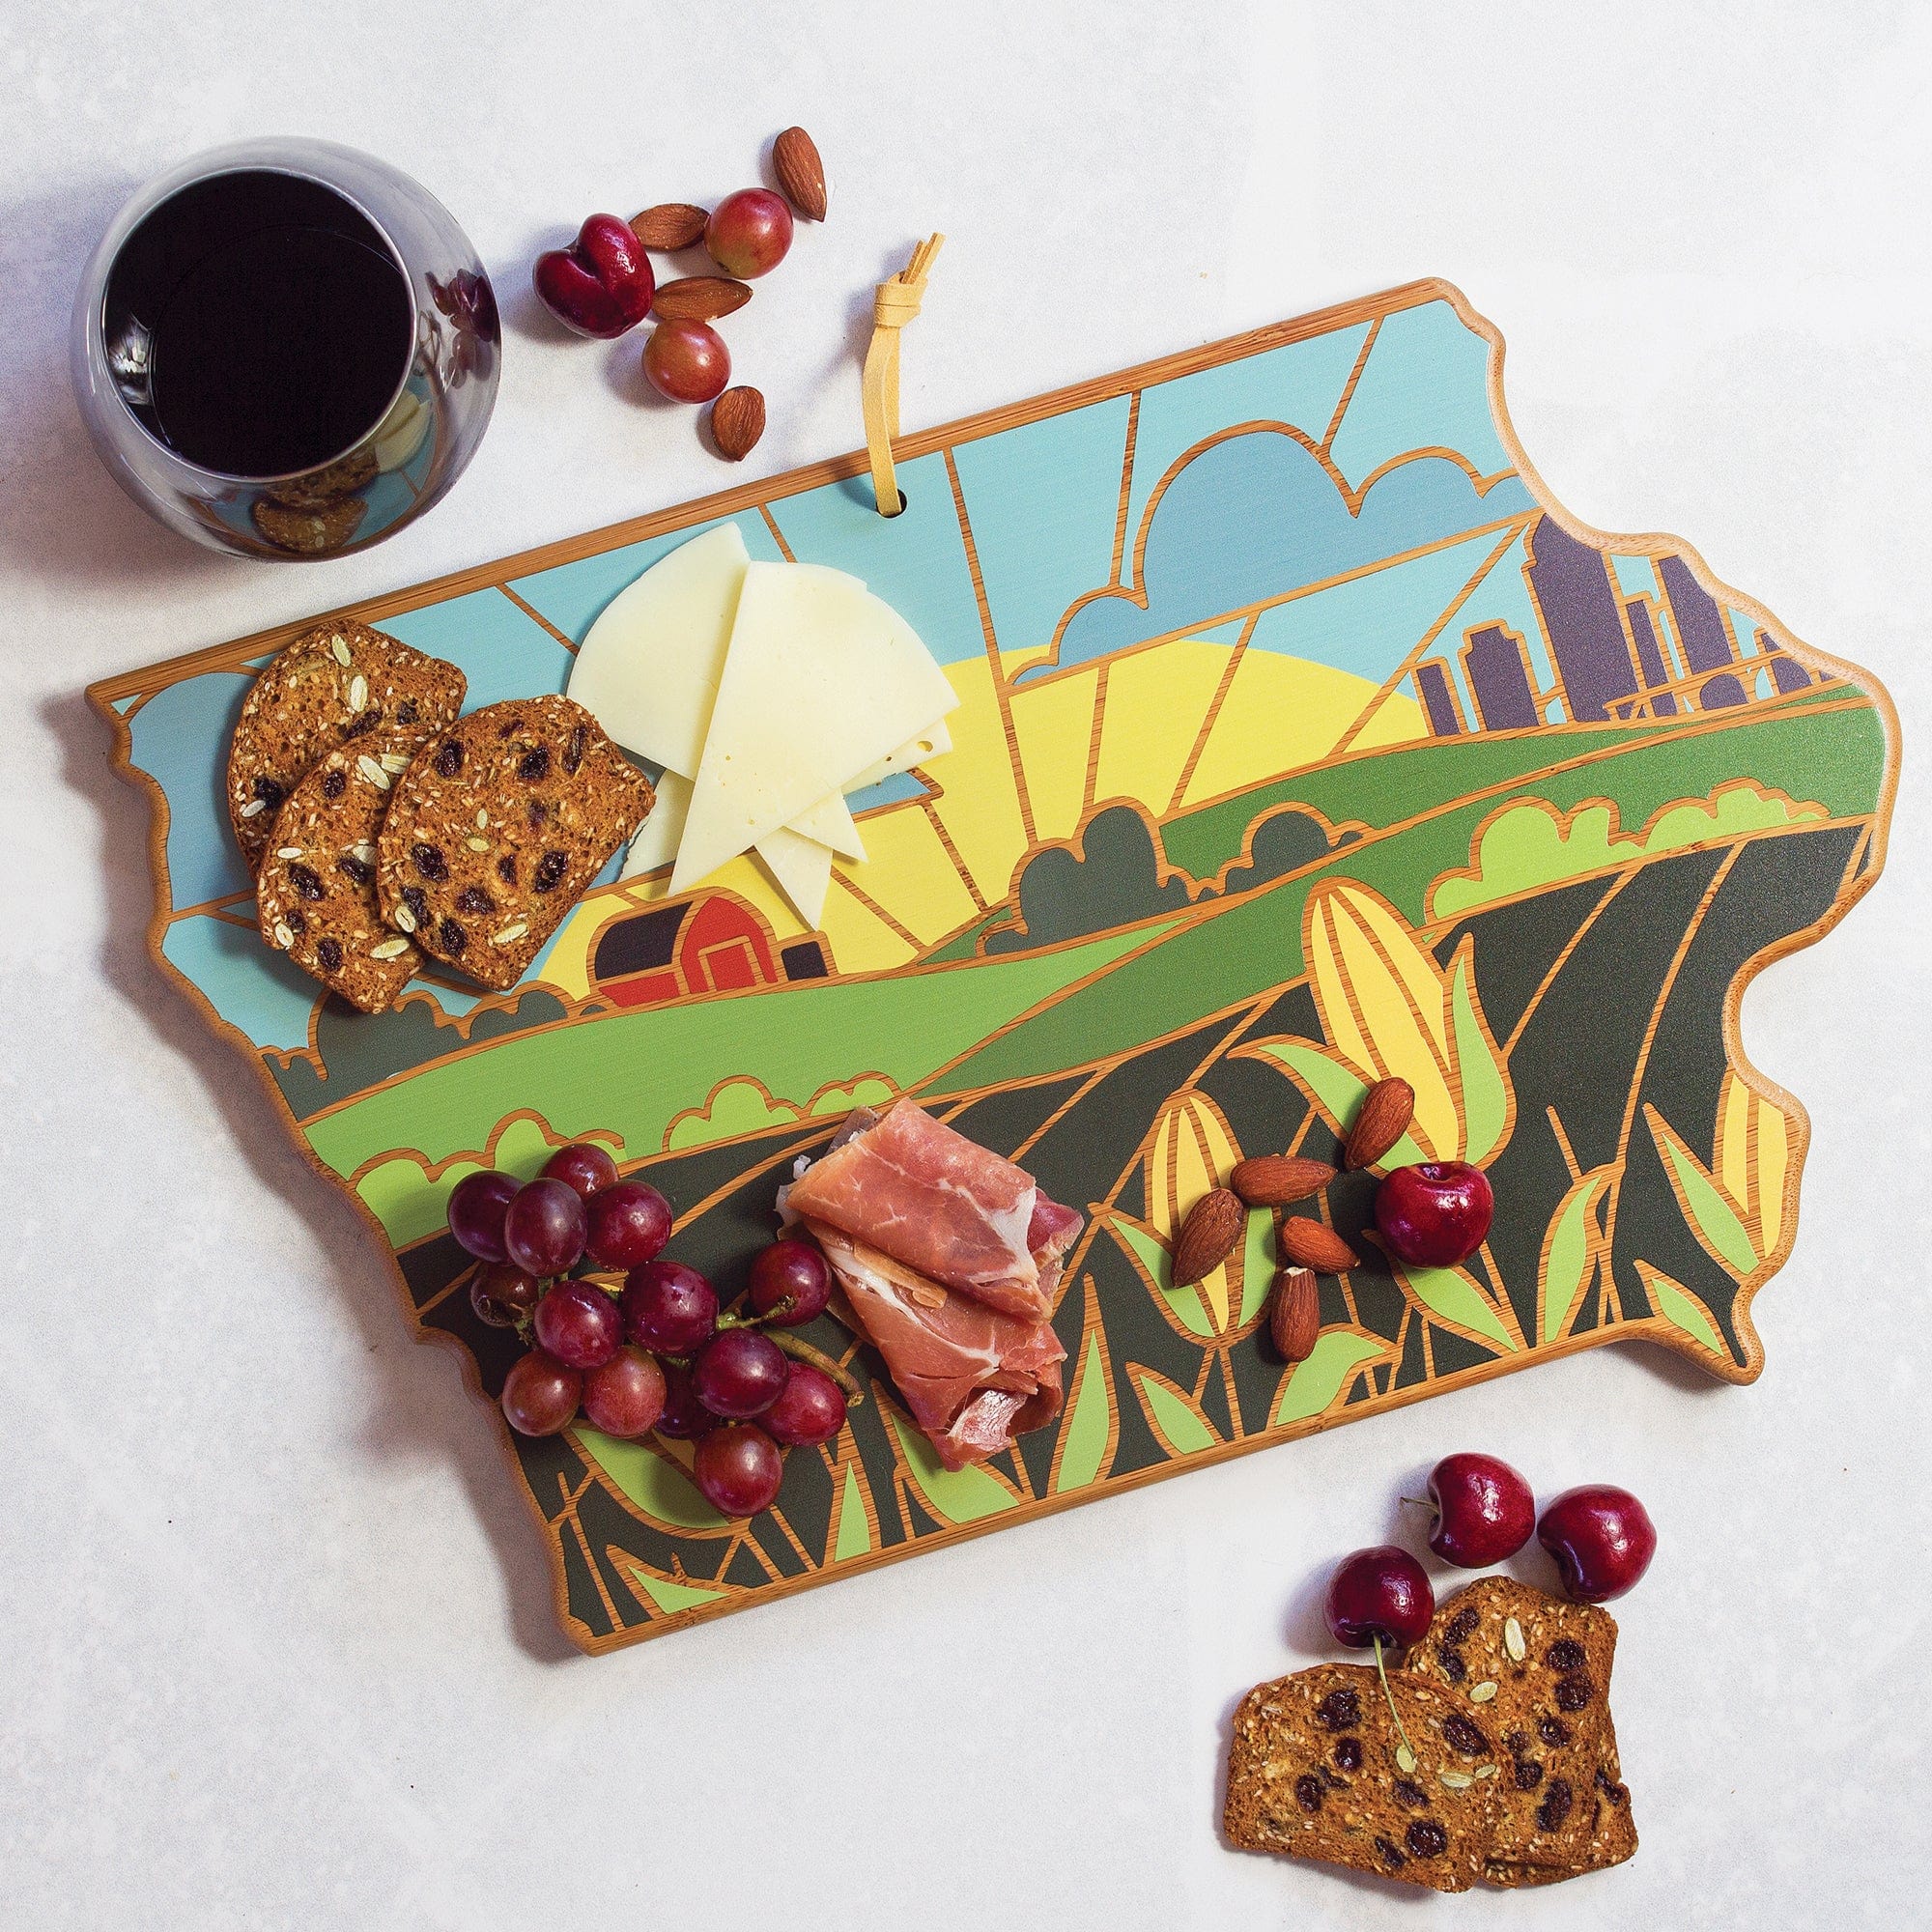 Totally Bamboo Iowa State Shaped Serving and Cutting Board with Artwork by Summer Stokes